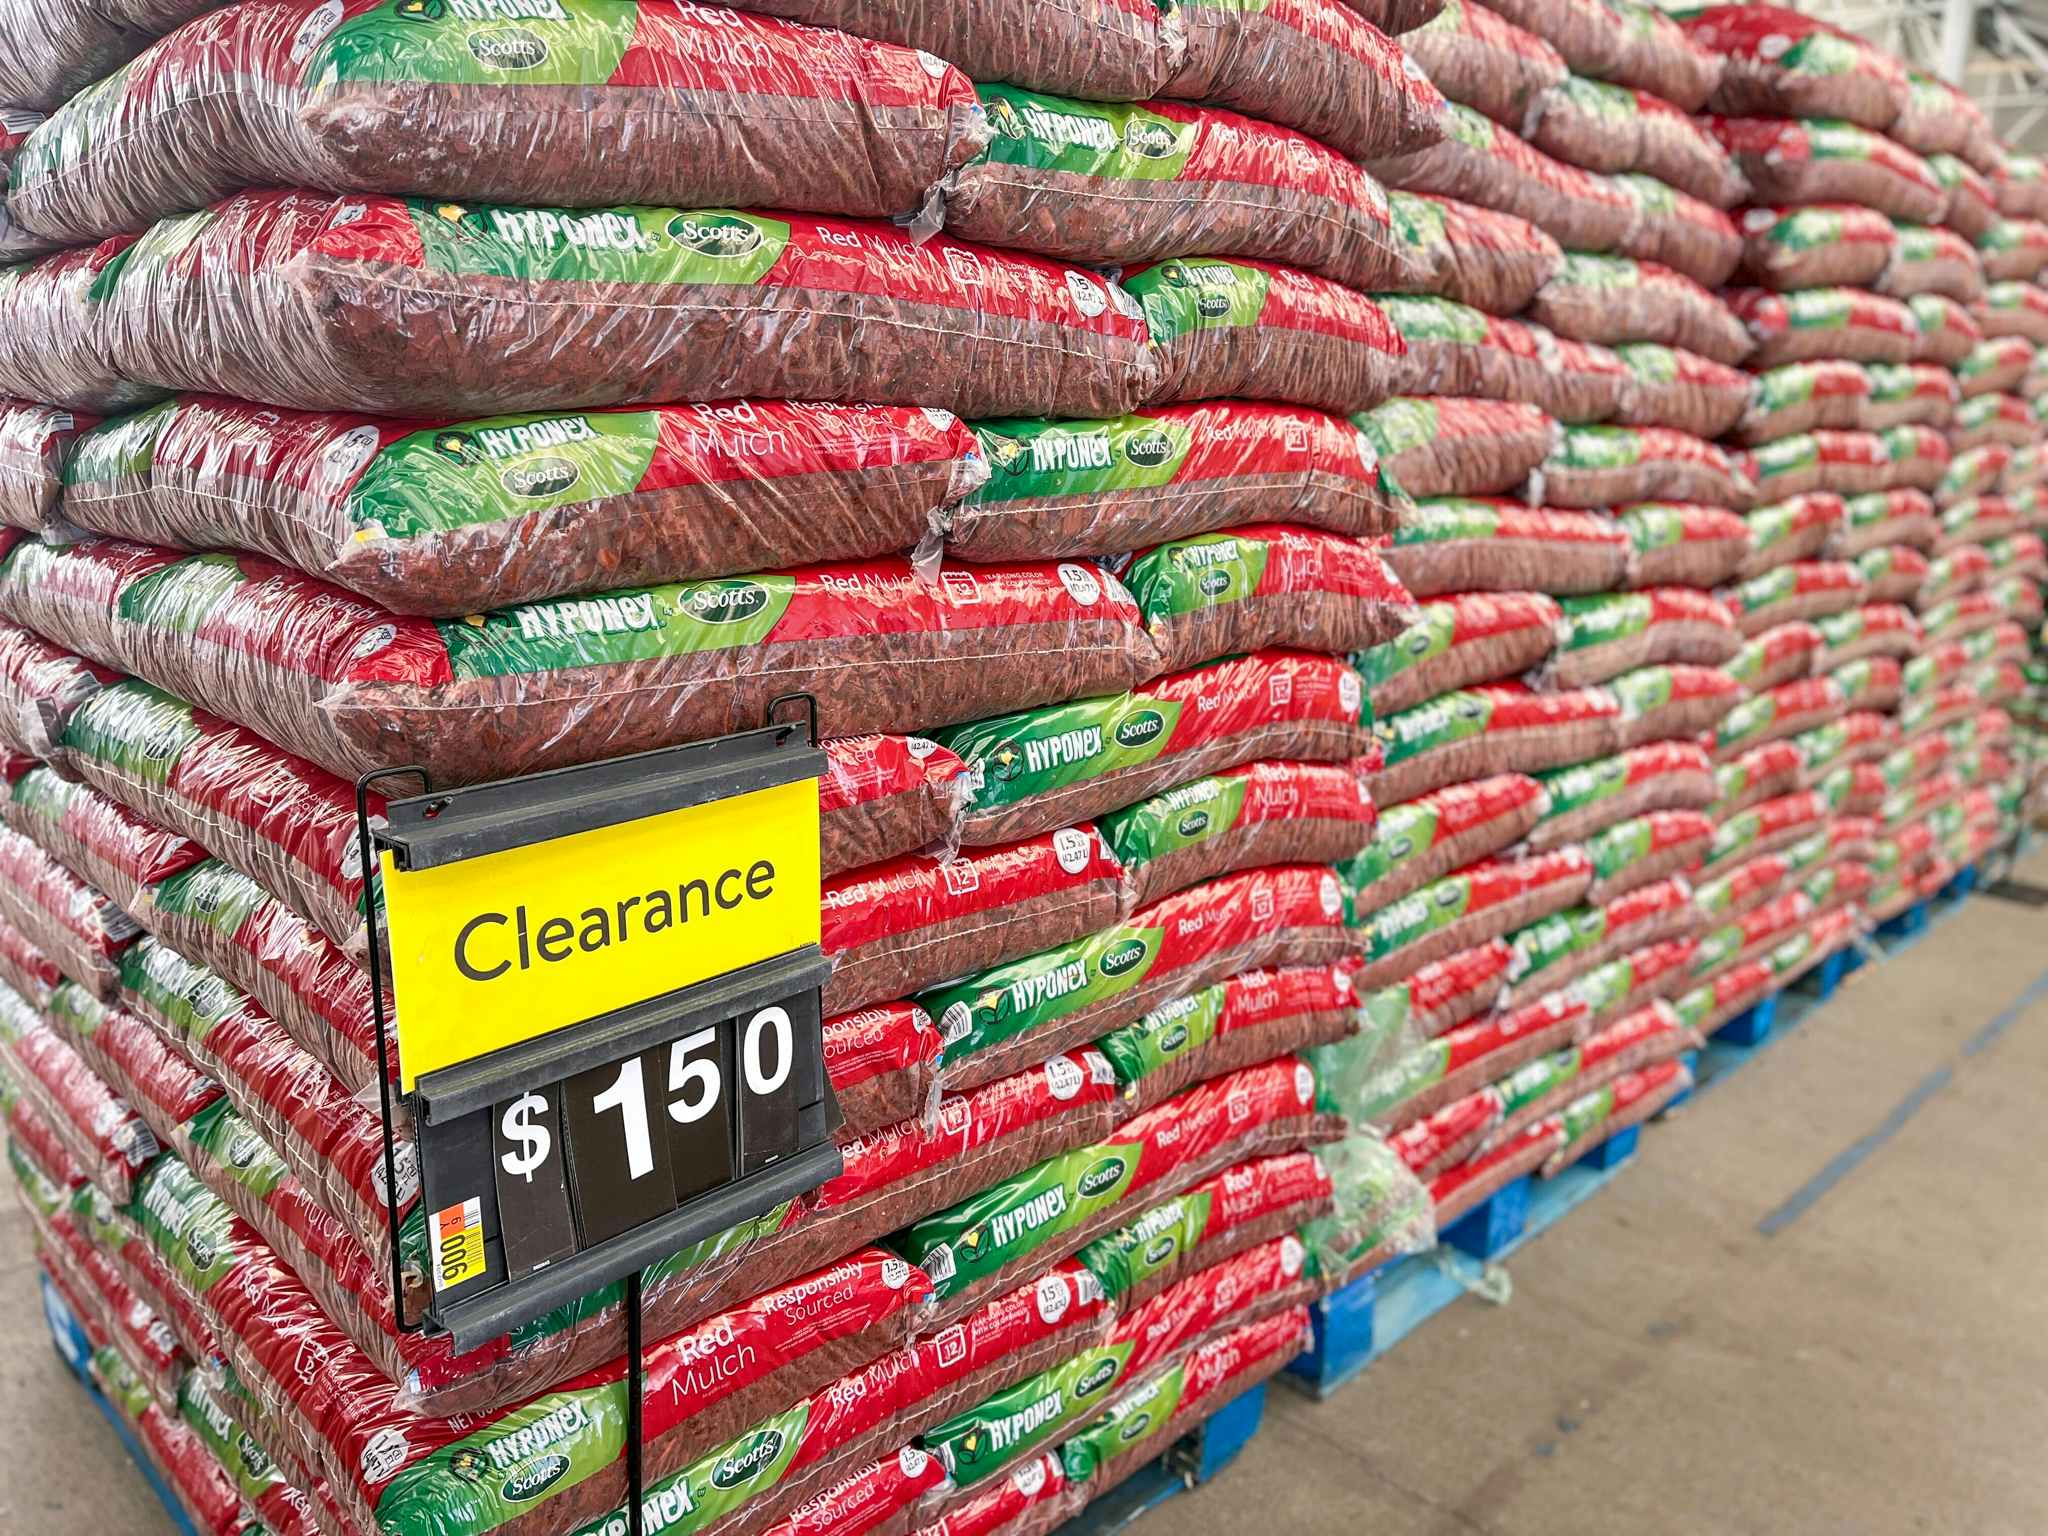 Scotts Hyponex Mulch Clearance at Walmart — Only $1.50